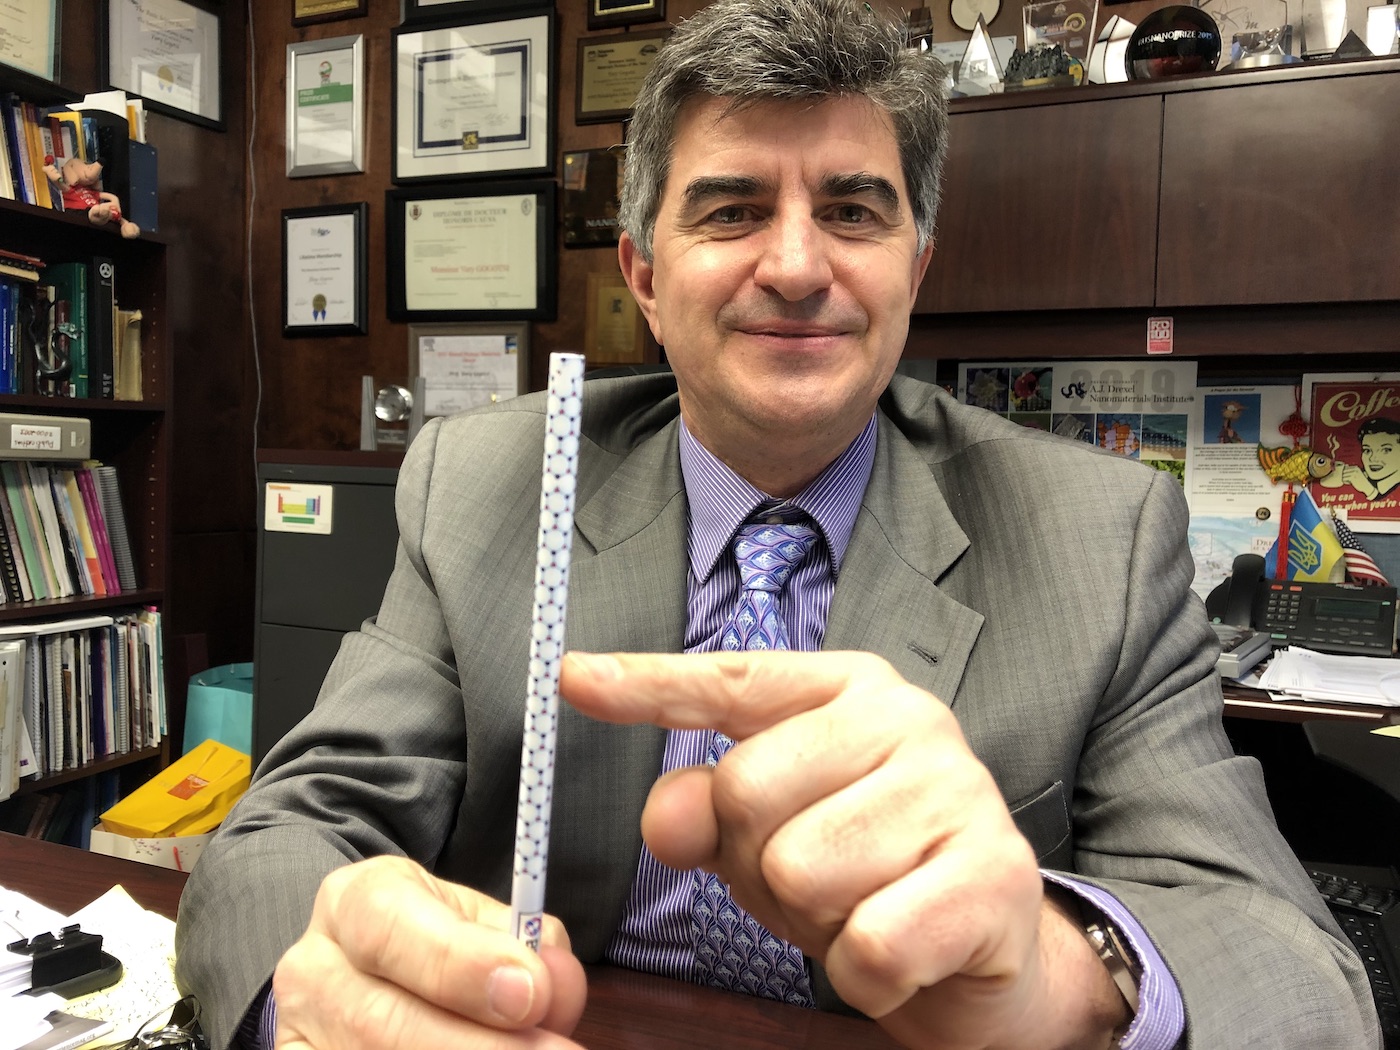 Professor Gogotsi points to a pencil with the molecular structure of carbon nanotubes illustrated on the outside